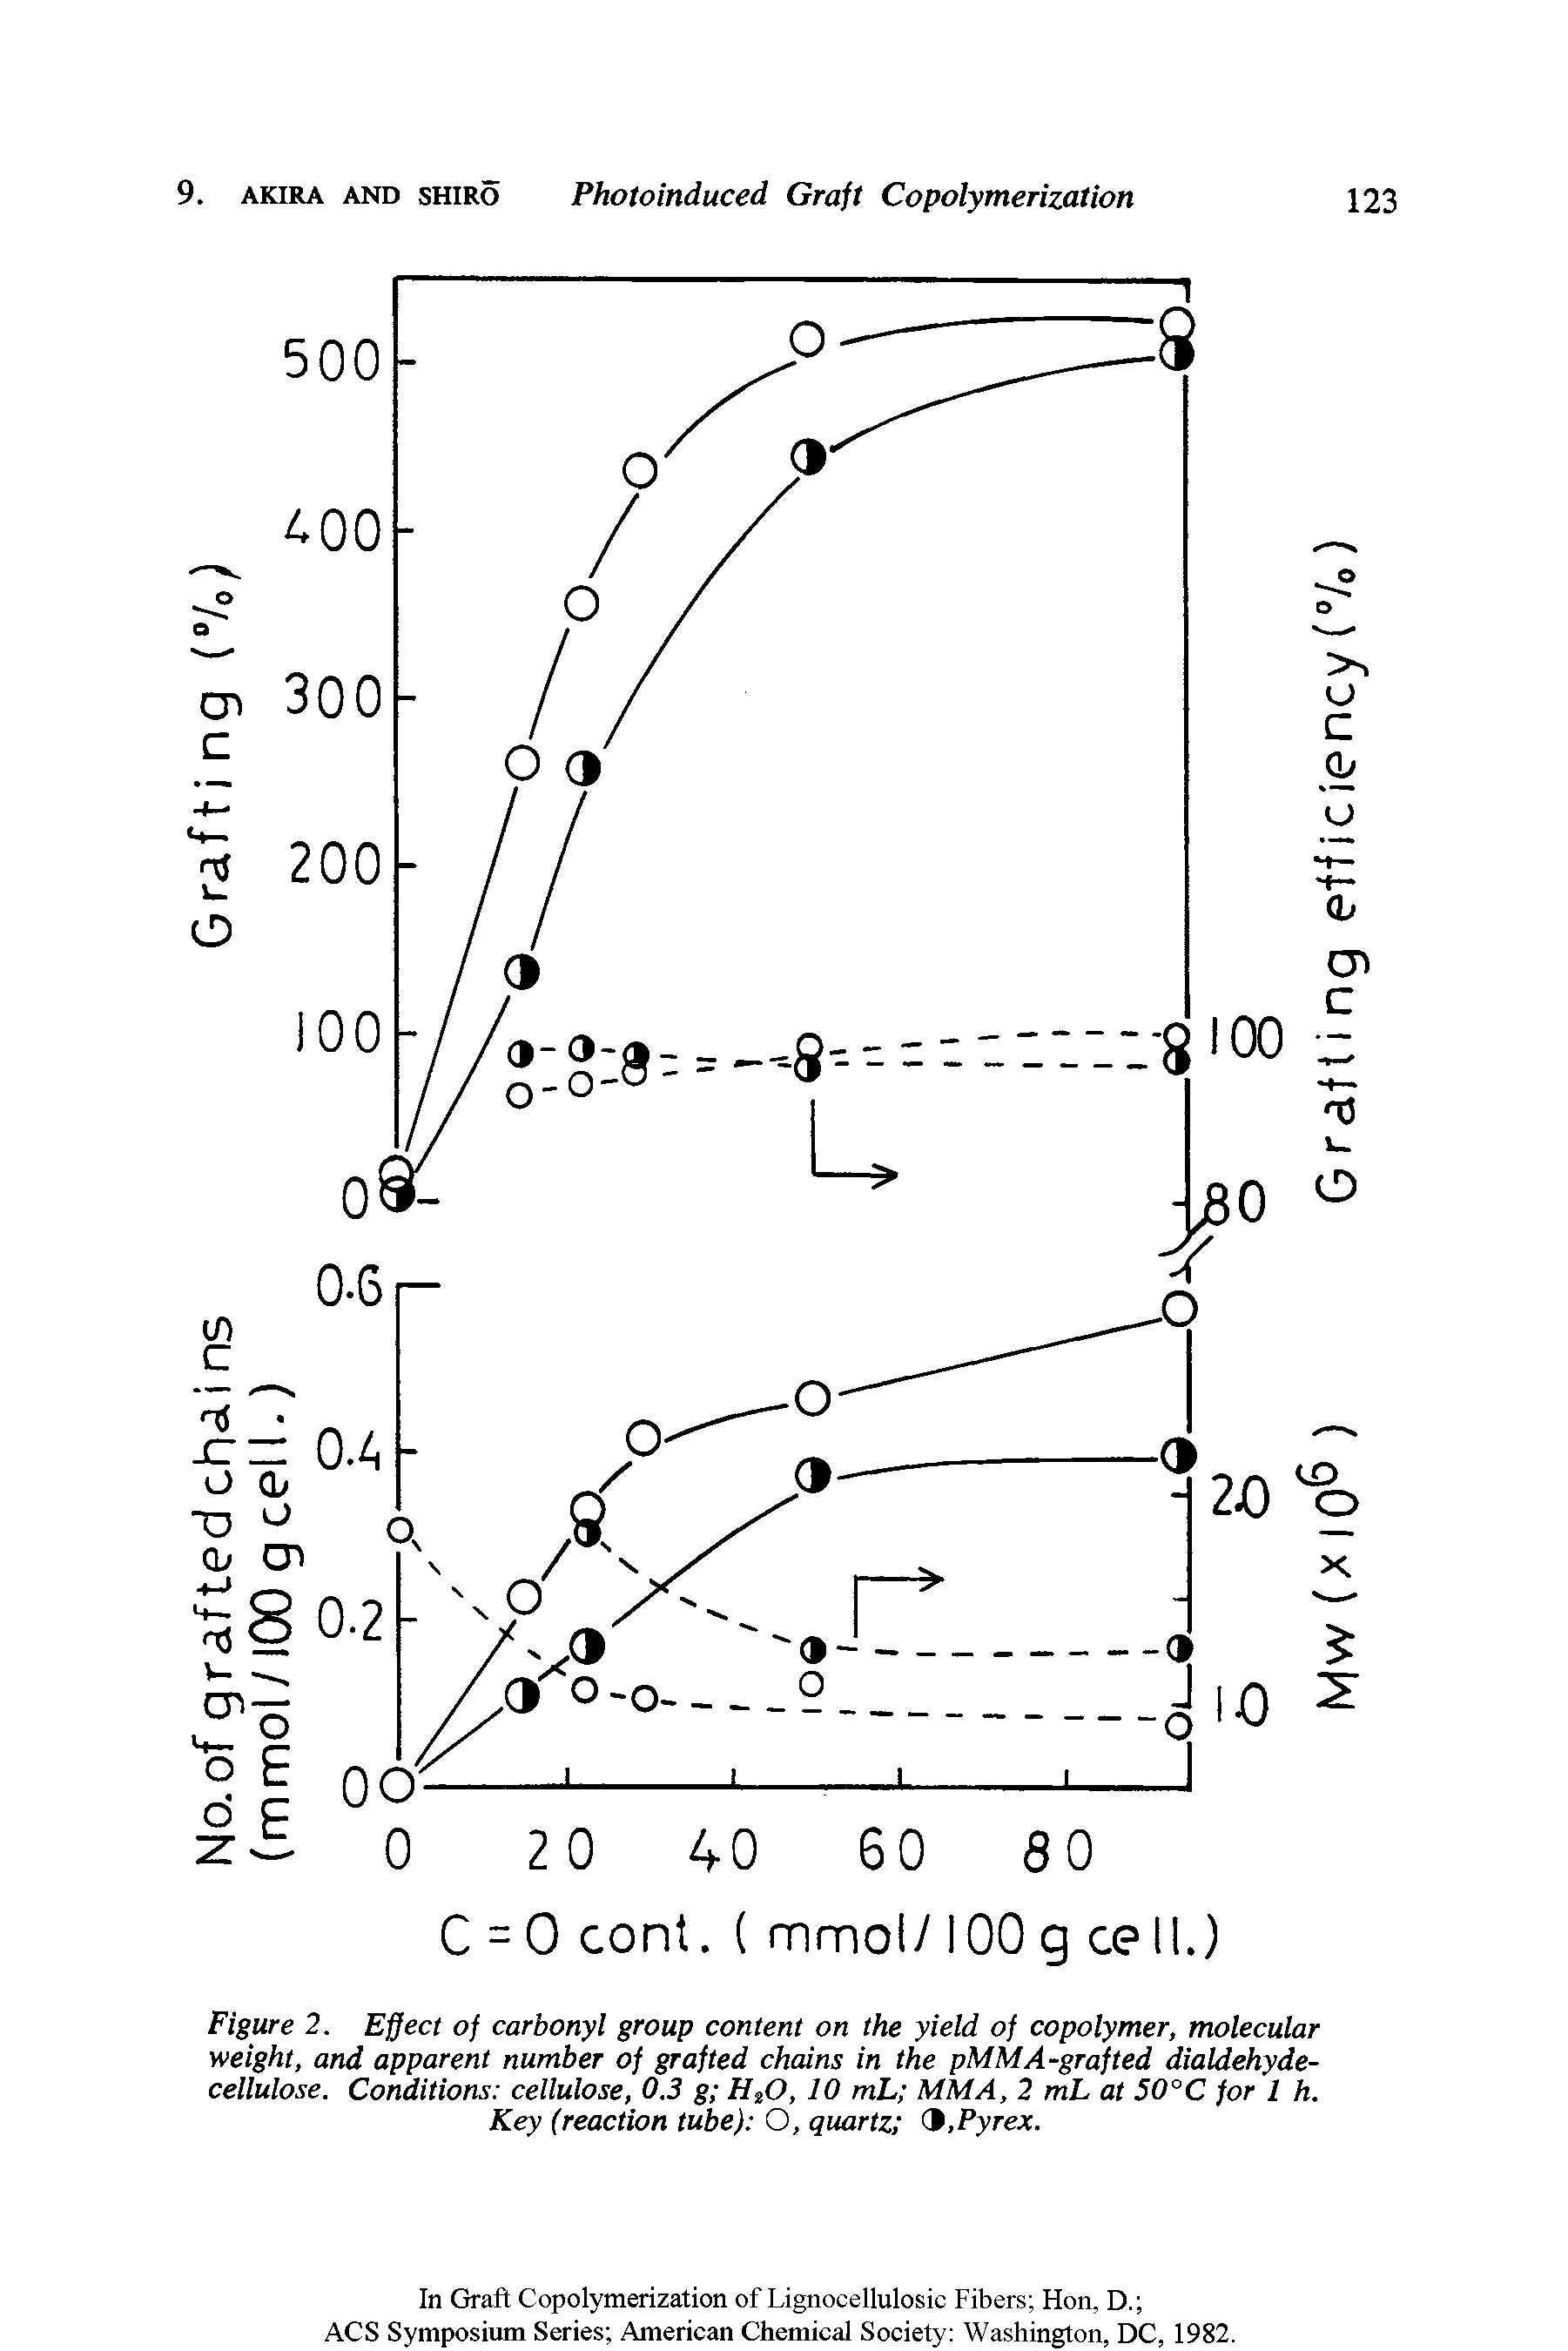 Figure 2. Effect of carbonyl group content on the yield of copolymer, molecular weight, and apparent number of grafted chains in the pMMA-grafted dialdehyde-cellulose. Conditions cellulose, 0.3 g H2(), 10 mL MMA, 2 mL at 50°C for 1 h. Key (reaction tube) O, quartz d.Pyrex.